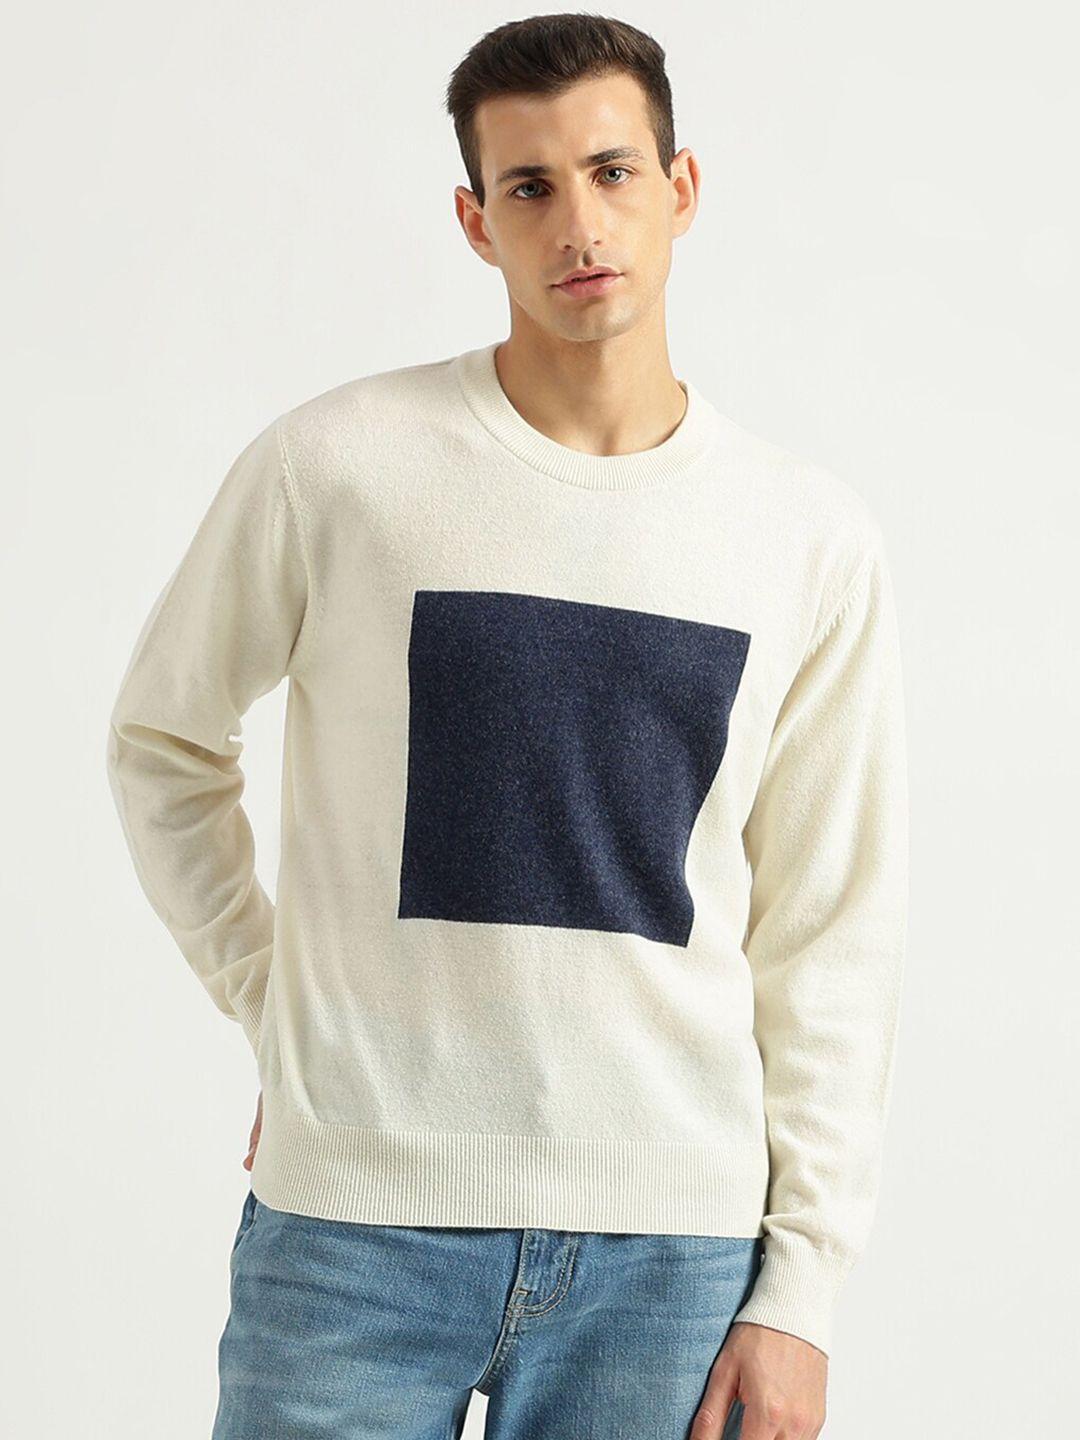 united-colors-of-benetton-colourblocked-round-neck-woollen-pullover